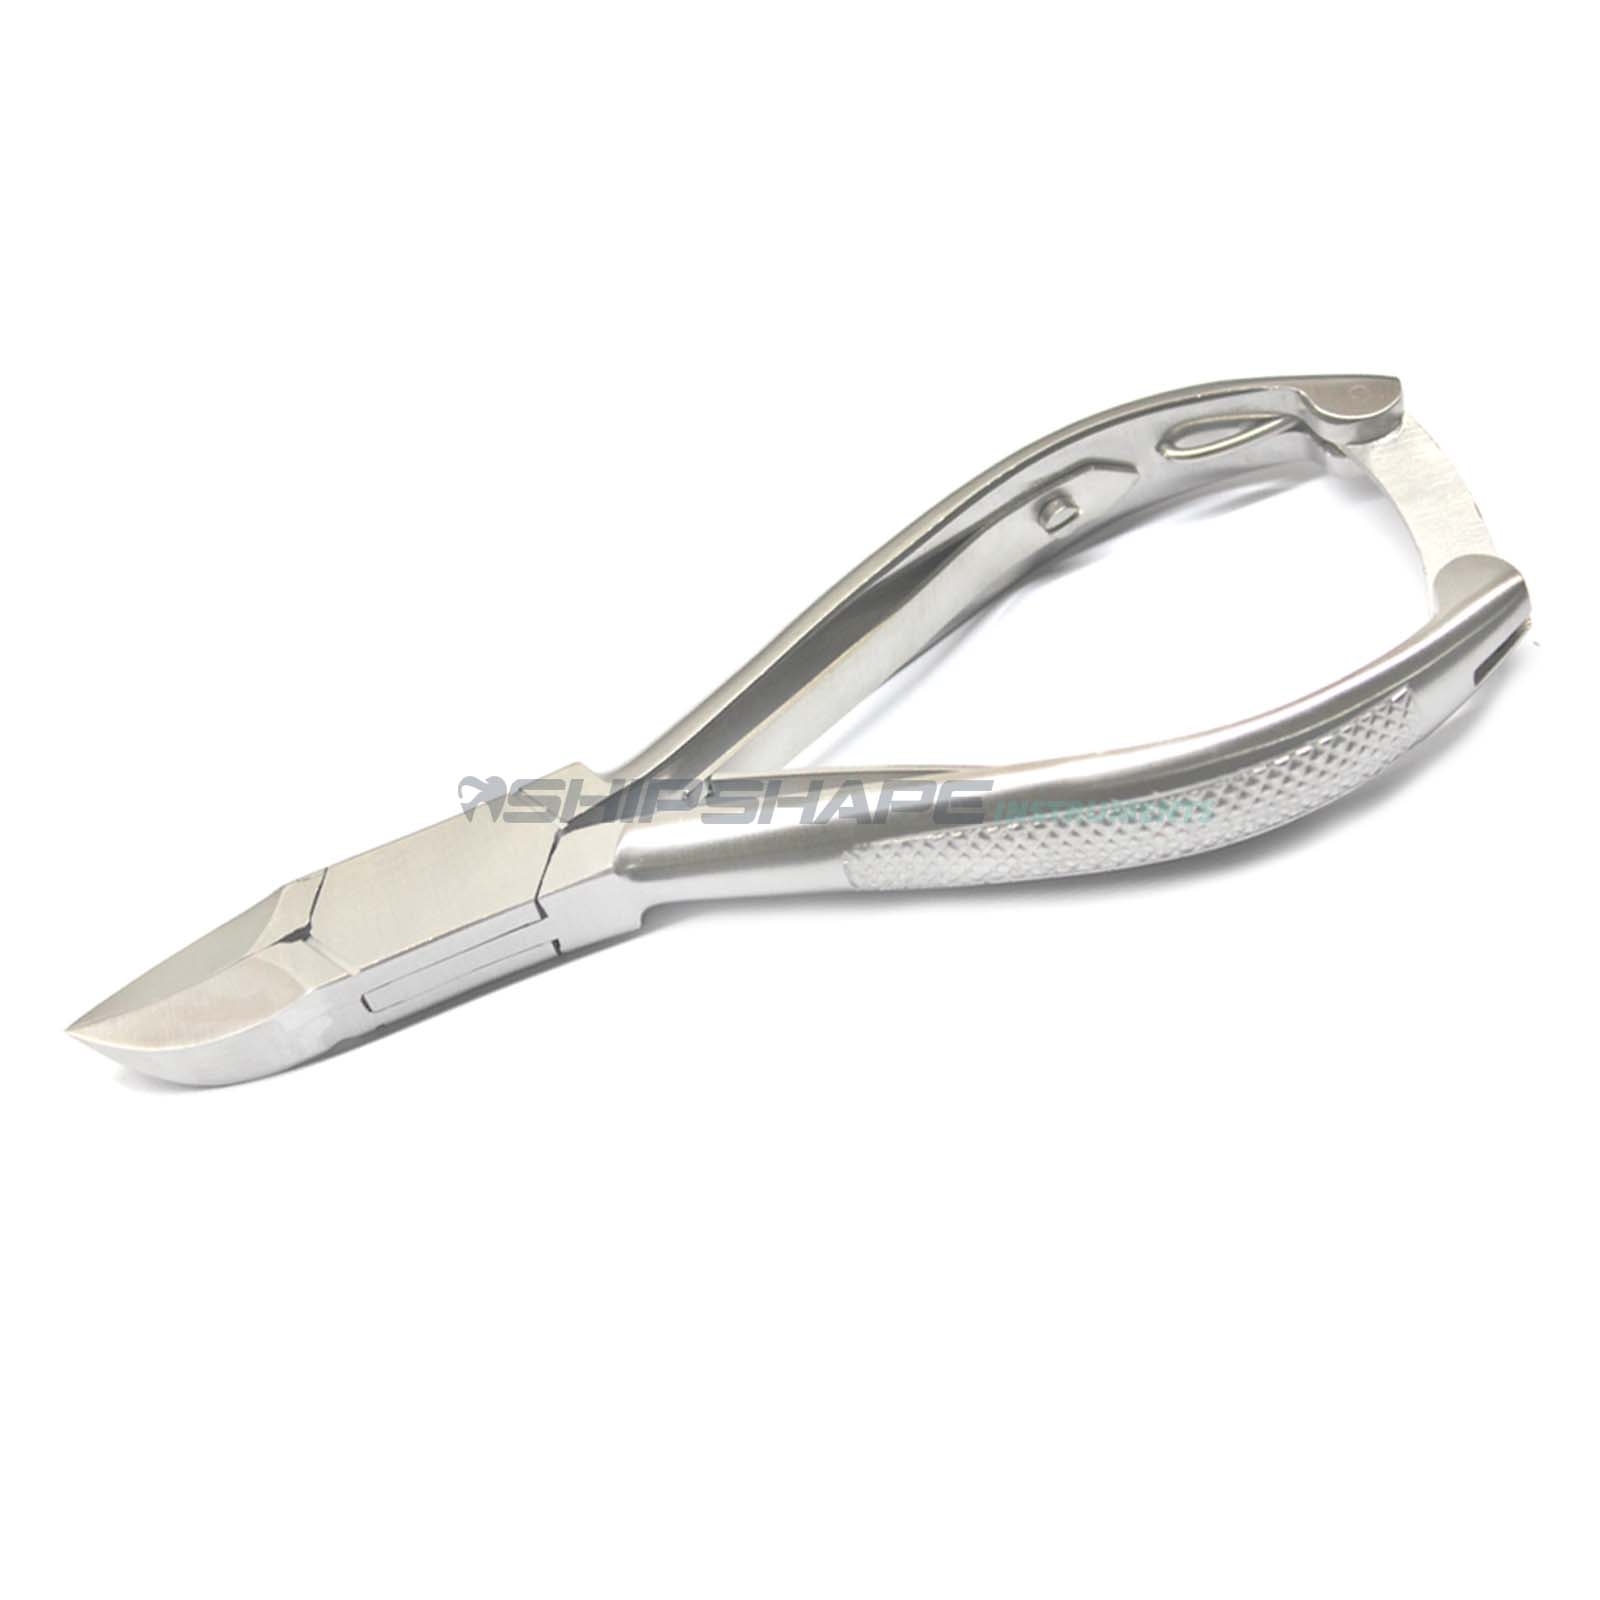 Toe nail Cutters clippers for ingrown toenails - Professional Heavy Duty Surgical Grade Stainless Steel Toe Cutter-1245